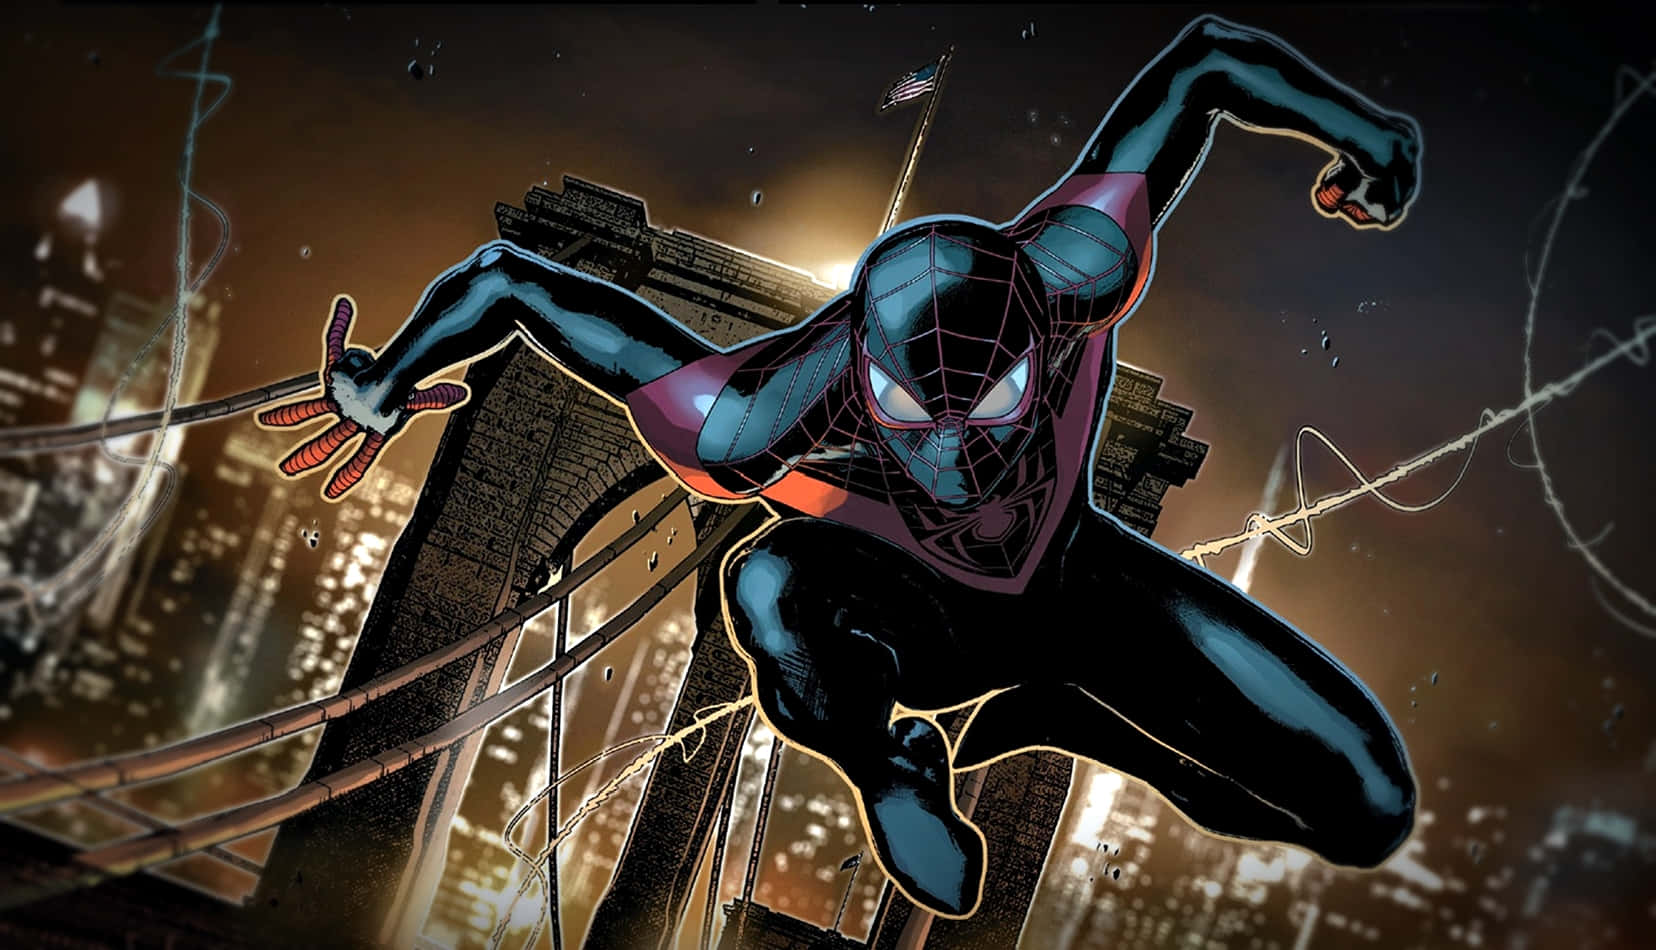 Ultimate Spider-Man Swinging Through the City Wallpaper